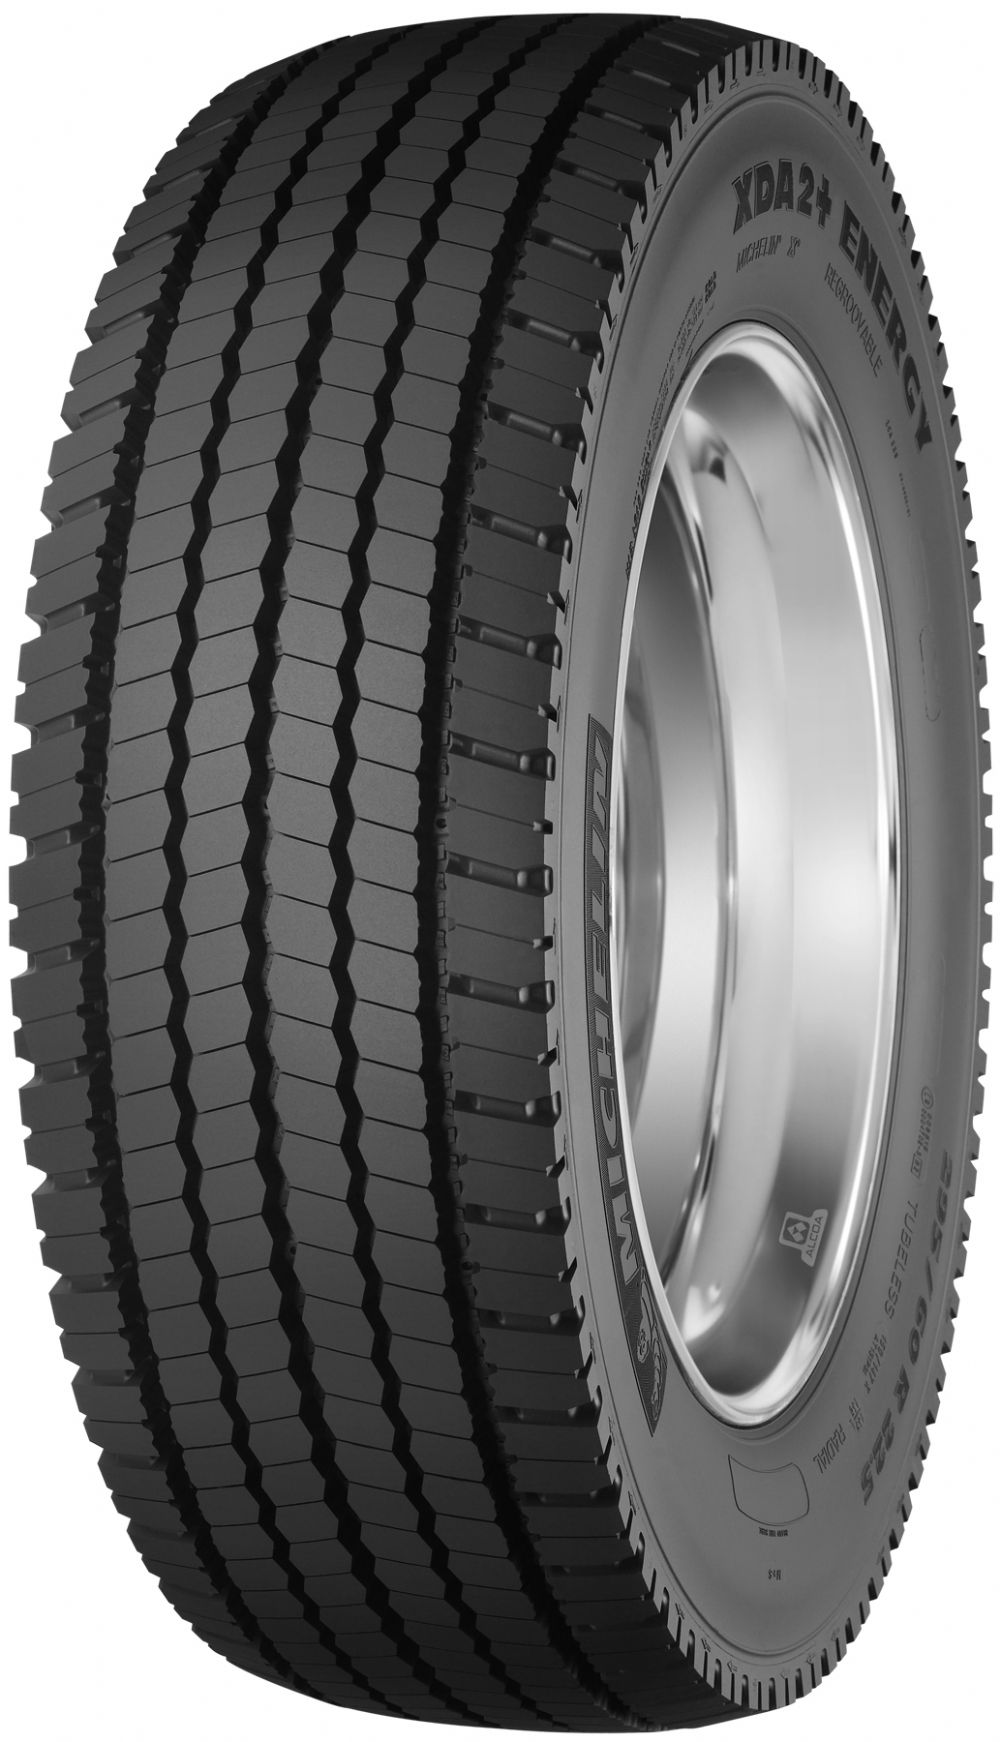 product_type-heavy_tires MICHELIN XDA2+ ENERGY 295/60 R22.5 M